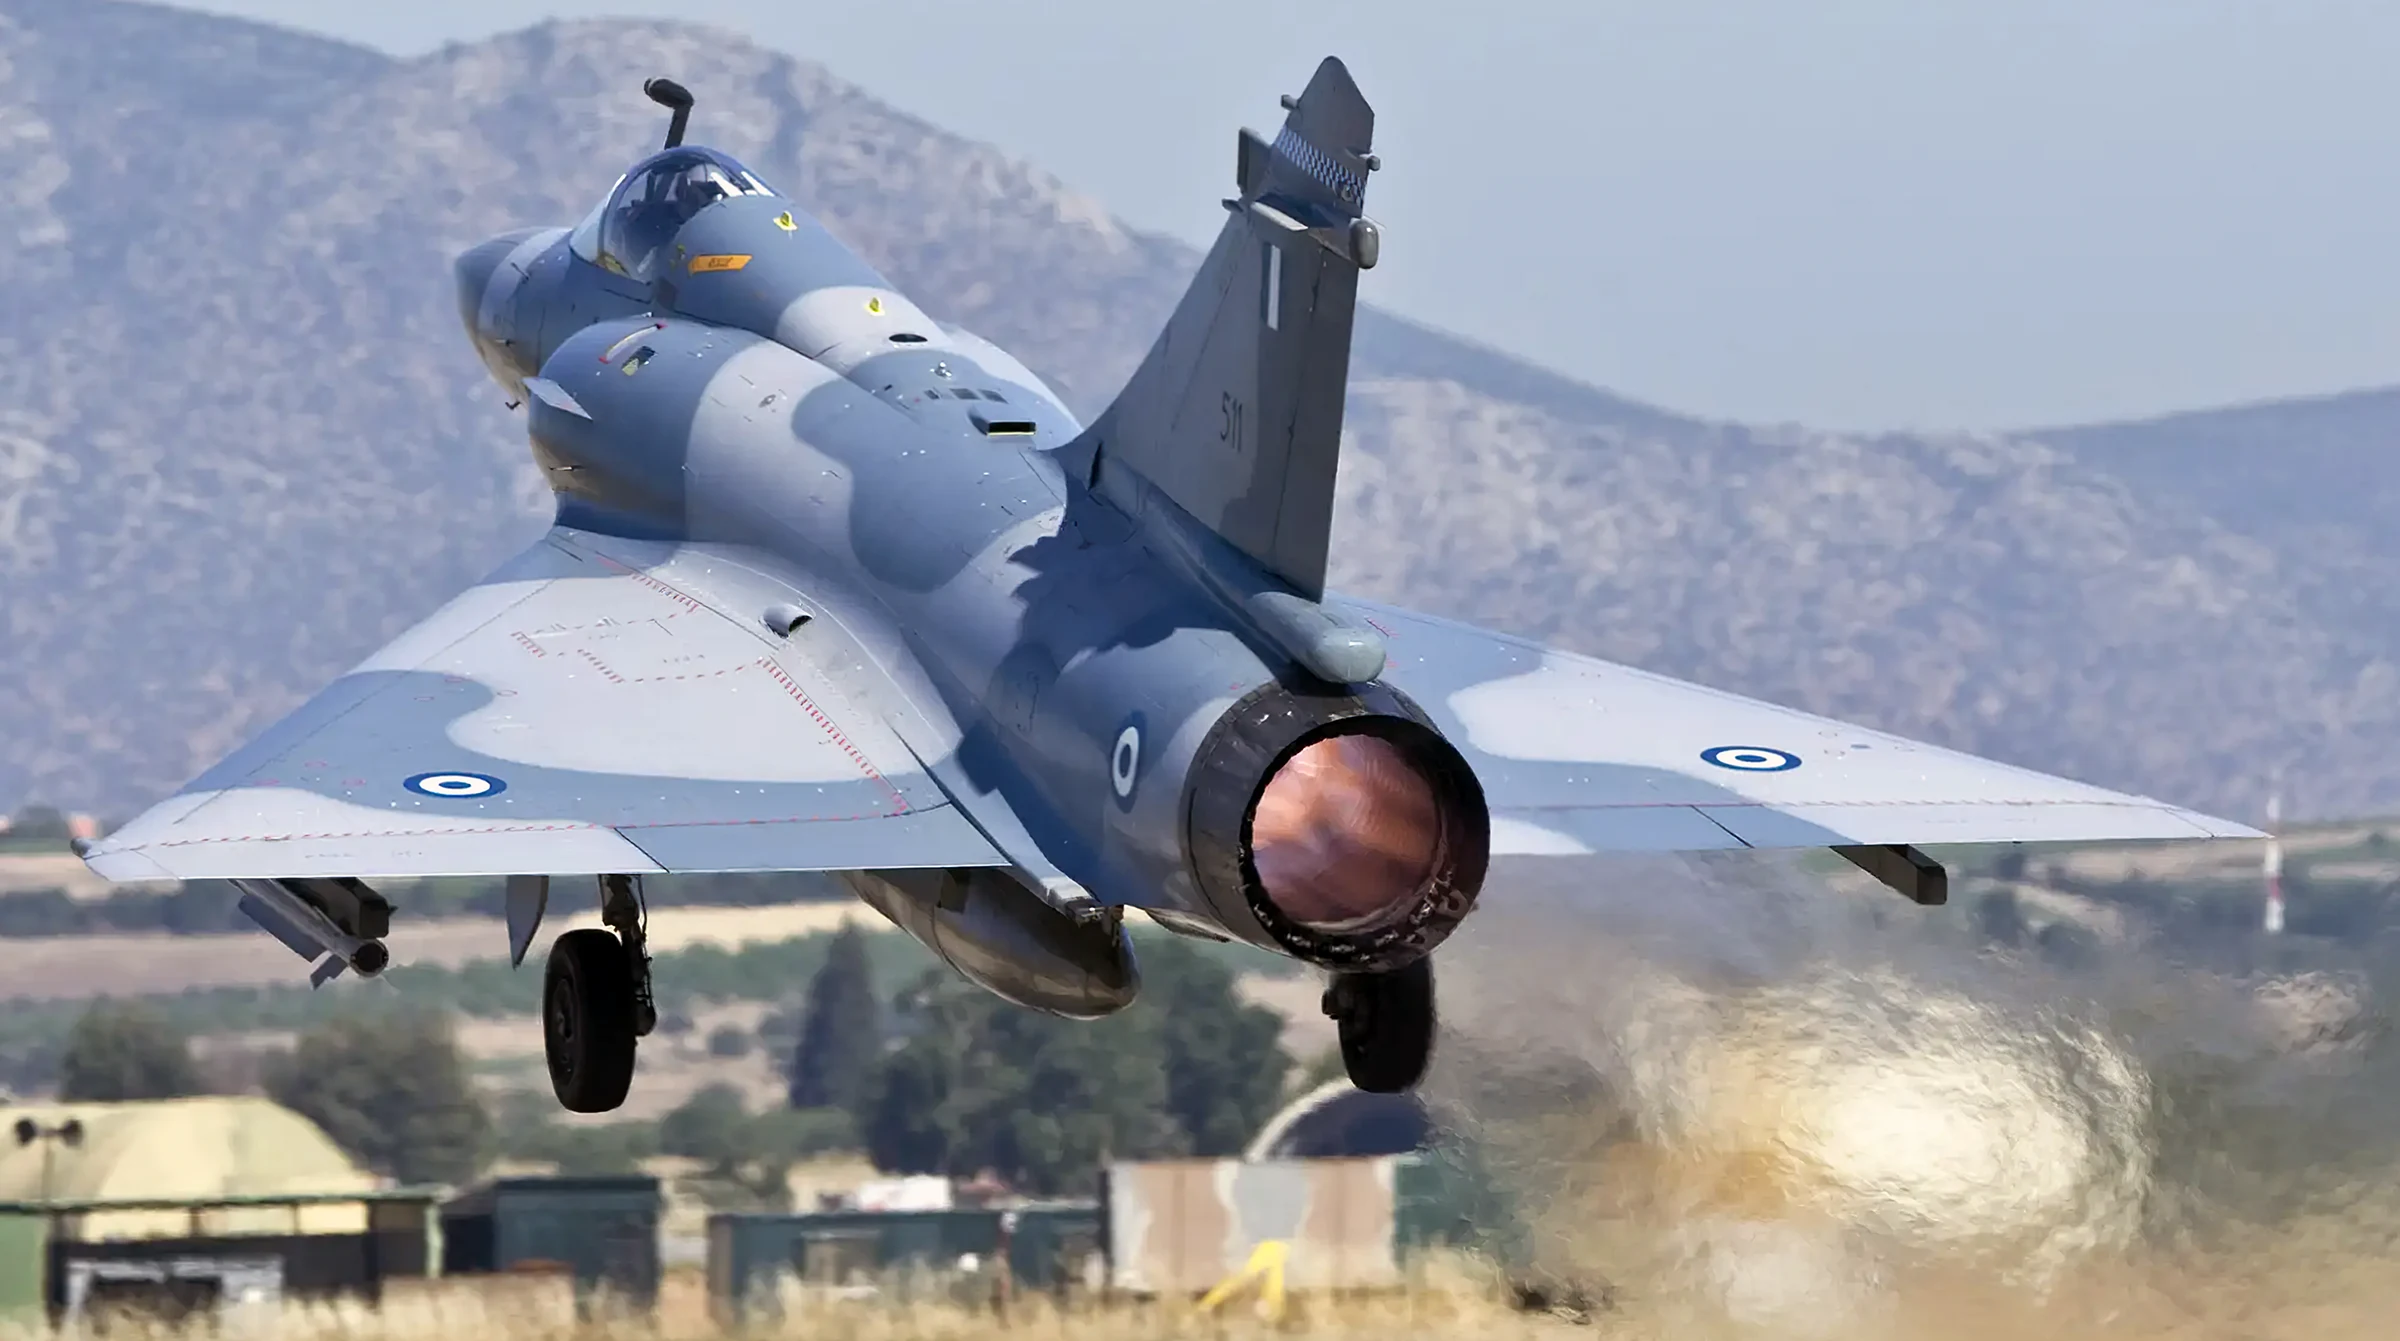 Afterburner take-off for a Hellenic Air Force Mirage 2000-5EG. Hellenic Air Force